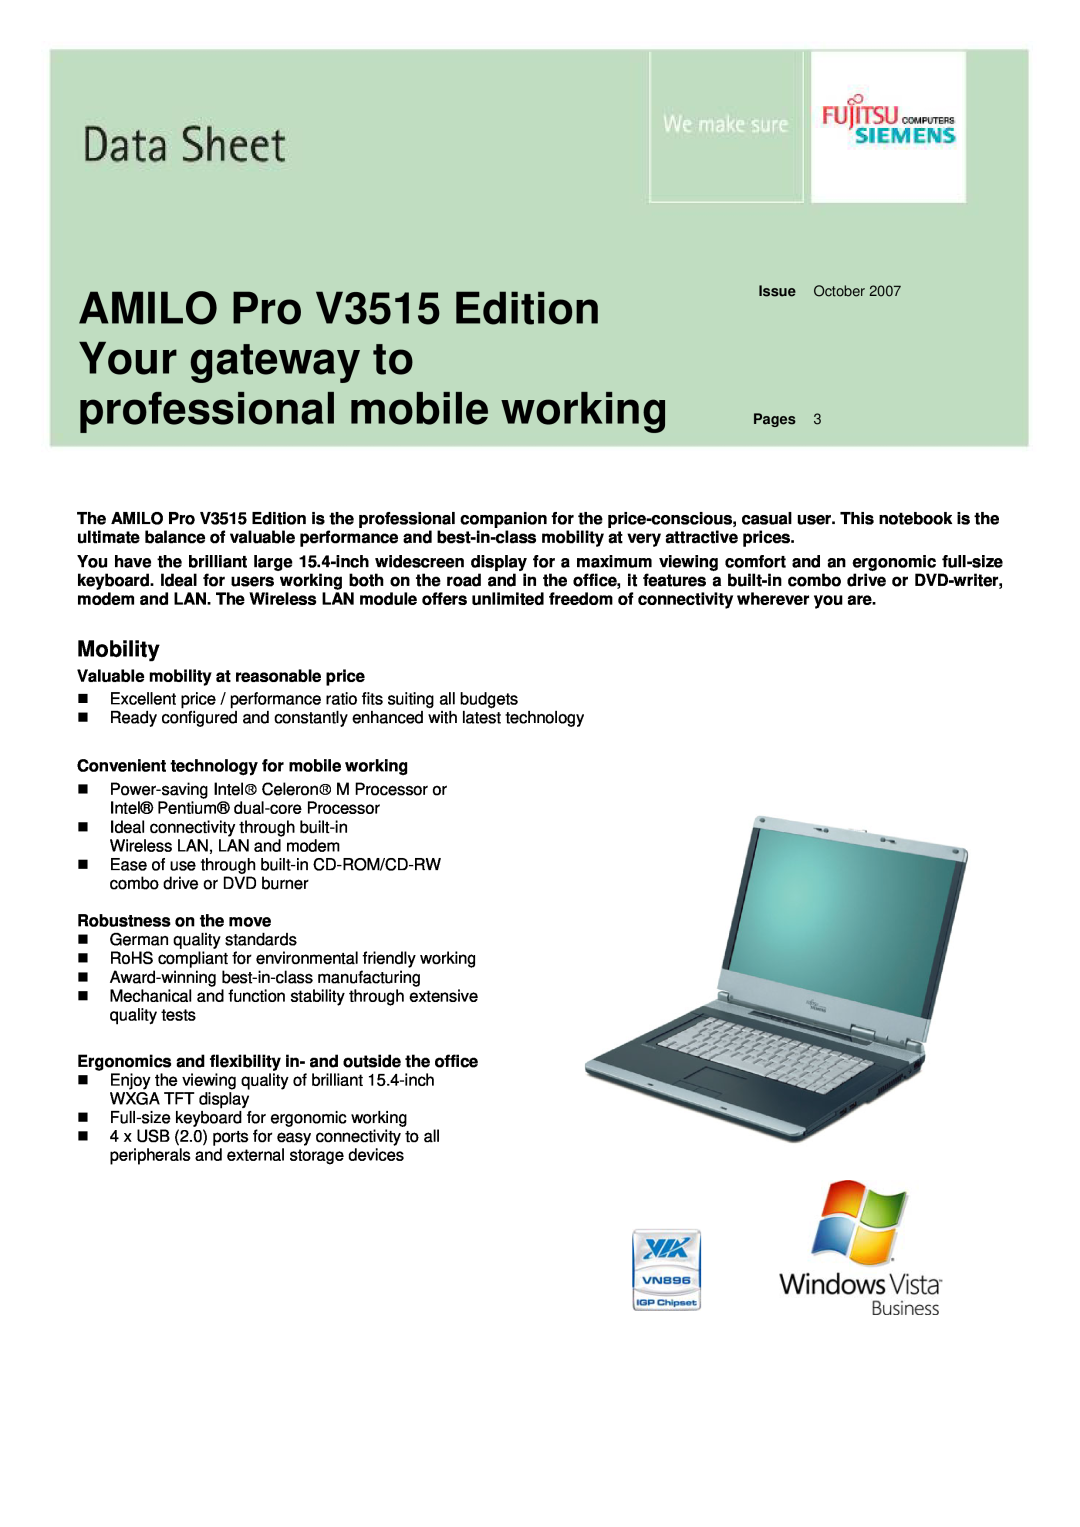 Fujitsu Siemens Computers manual AMILO Pro V3515 Edition Your gateway to professional mobile working, Mobility 